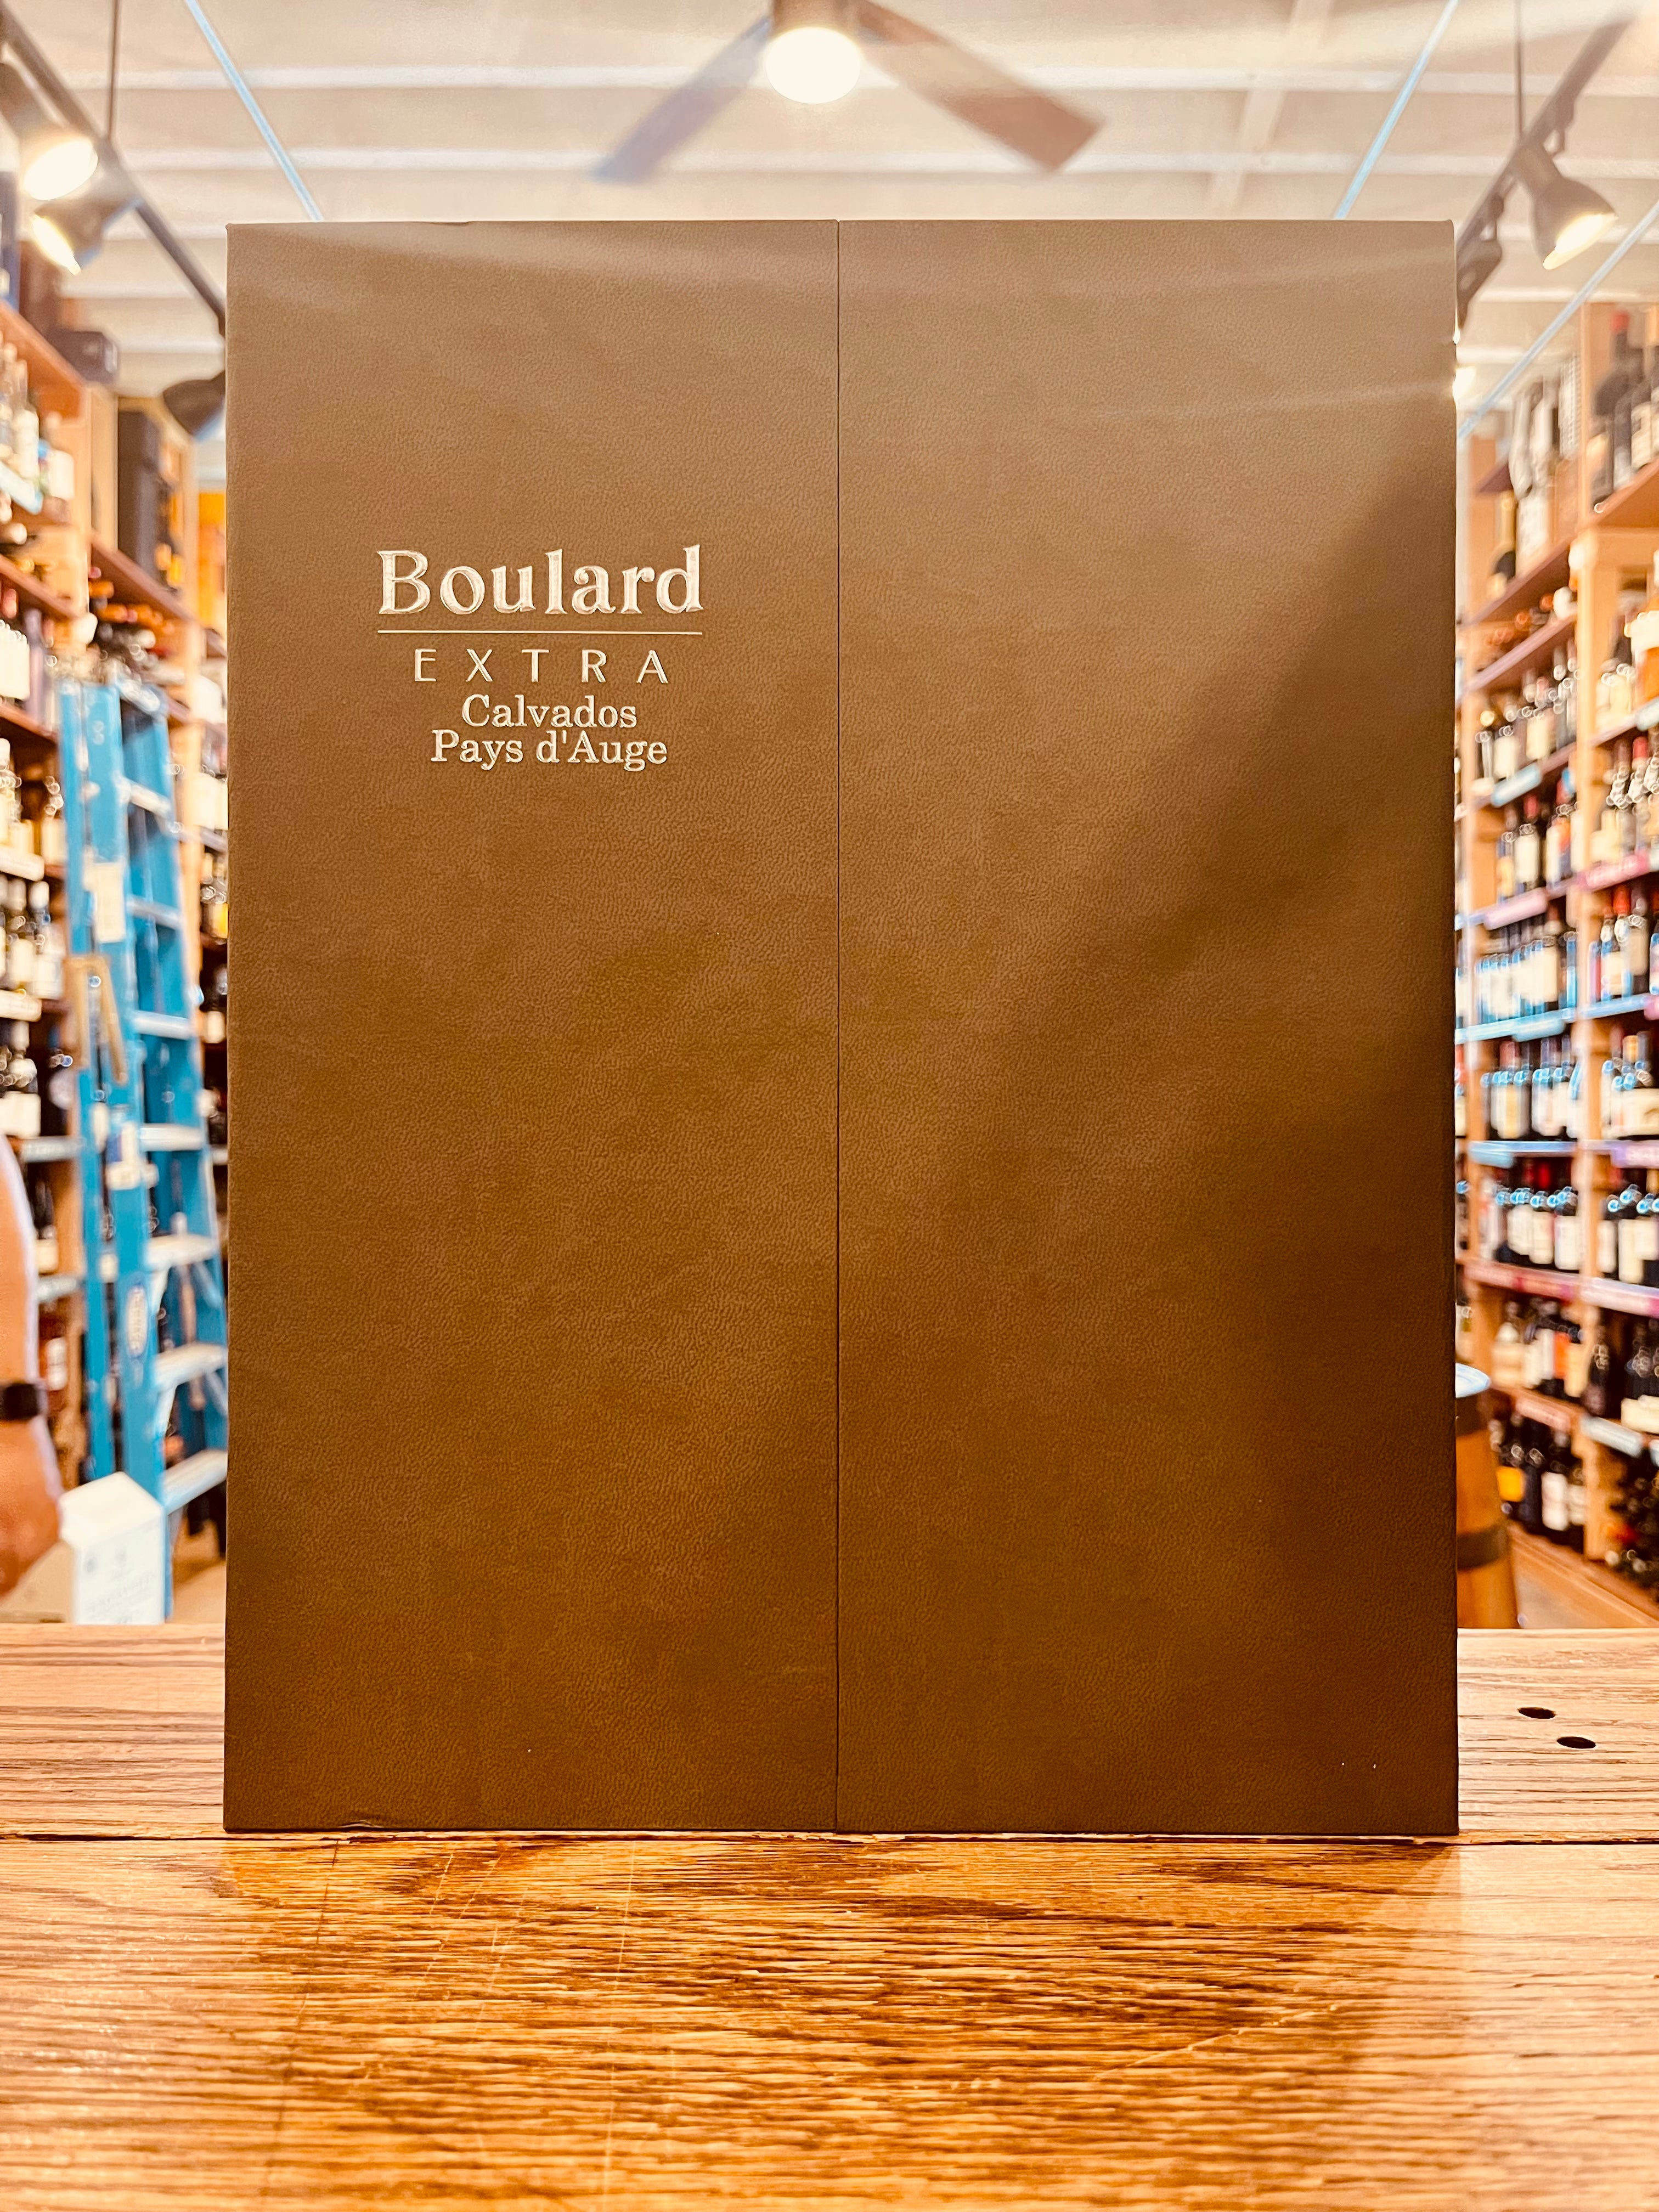 Boulard Extra Calvados Pays d’Auge 750mL silver colored box with white lettering